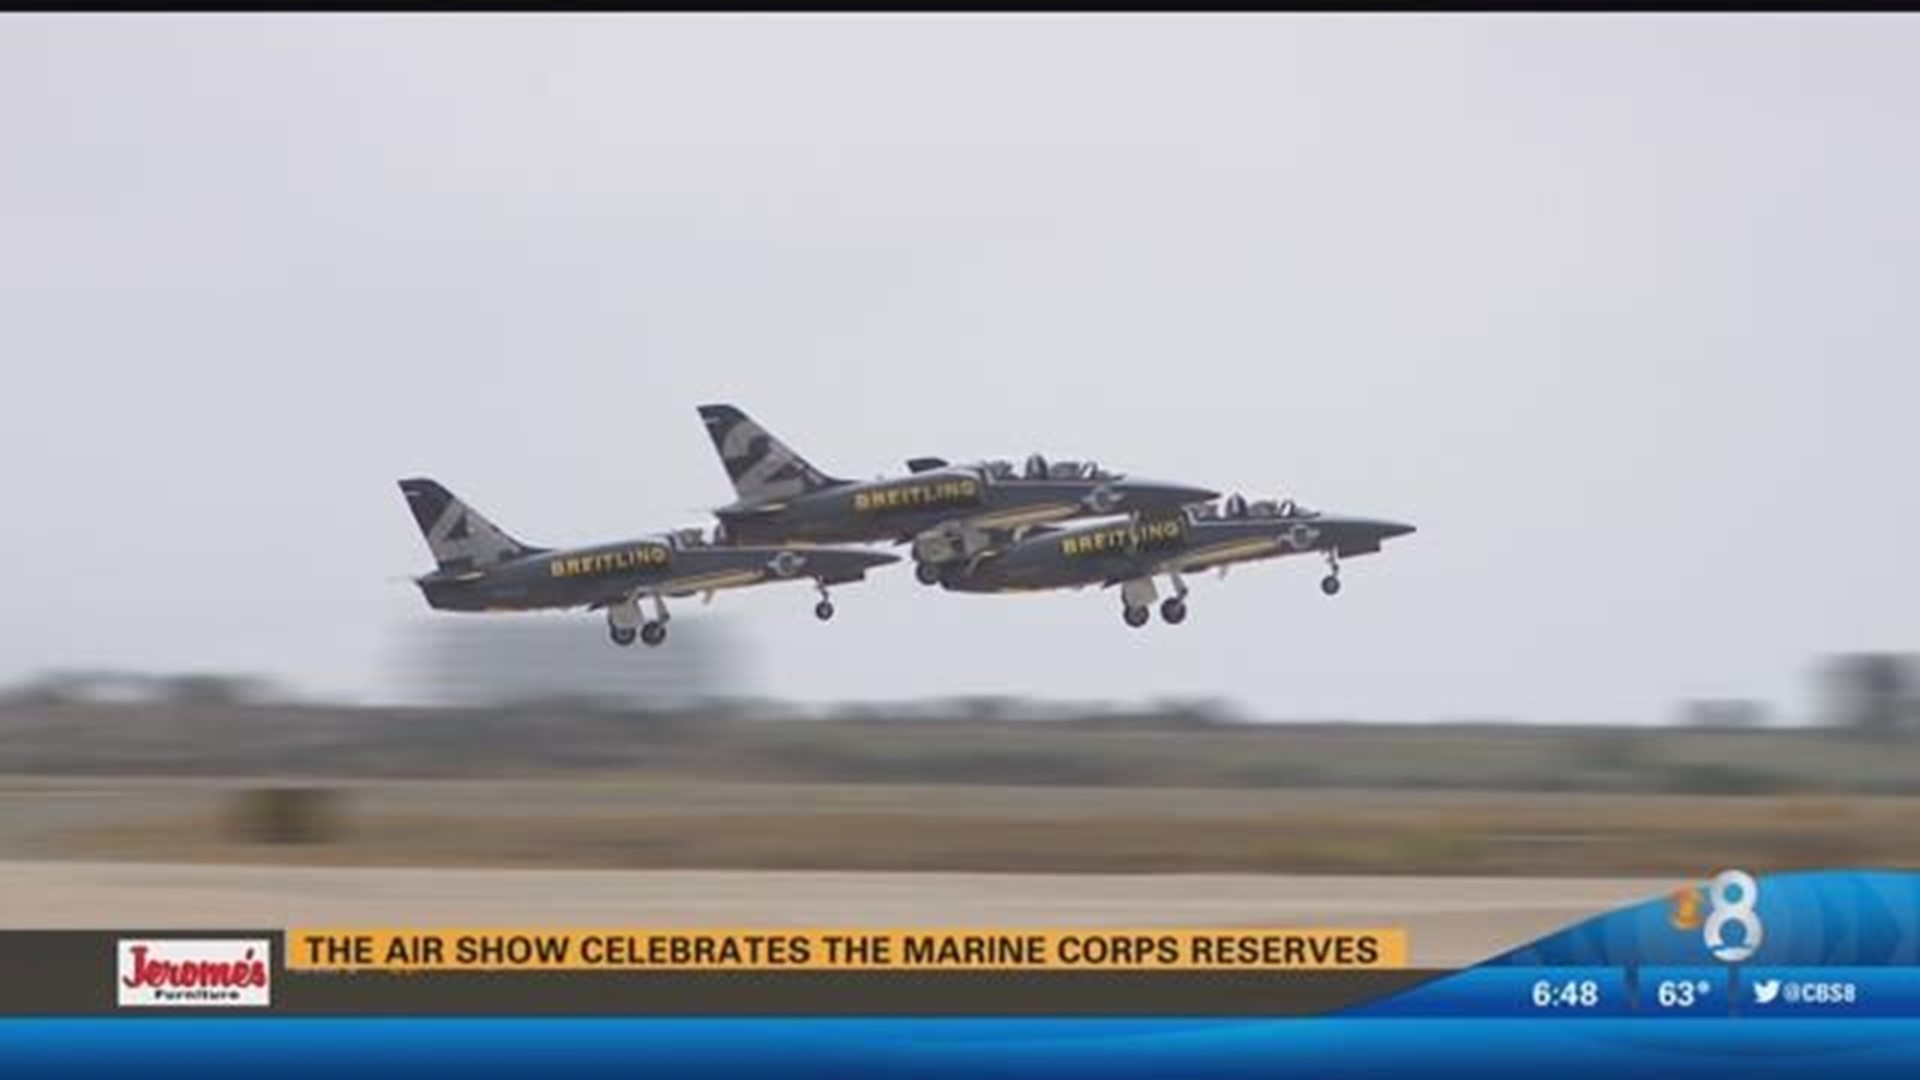 MCAS Miramar Air Show continues with flying colors